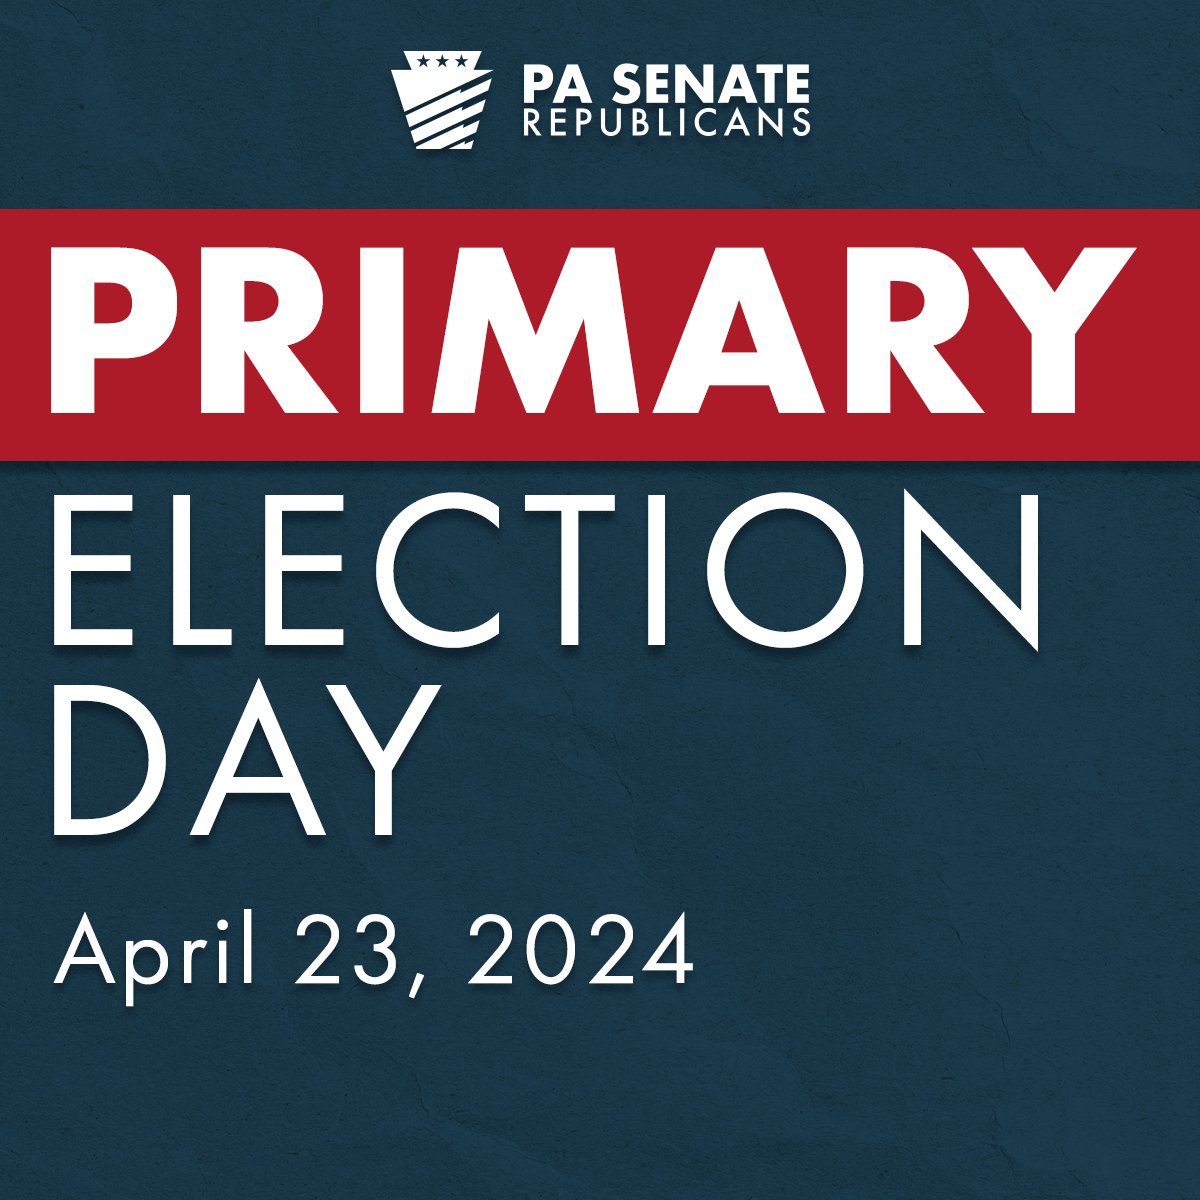 Today is primary election day, with polls open from 7 a.m. to 8 p.m. You can find your polling place here: bit.ly/3NvK71y